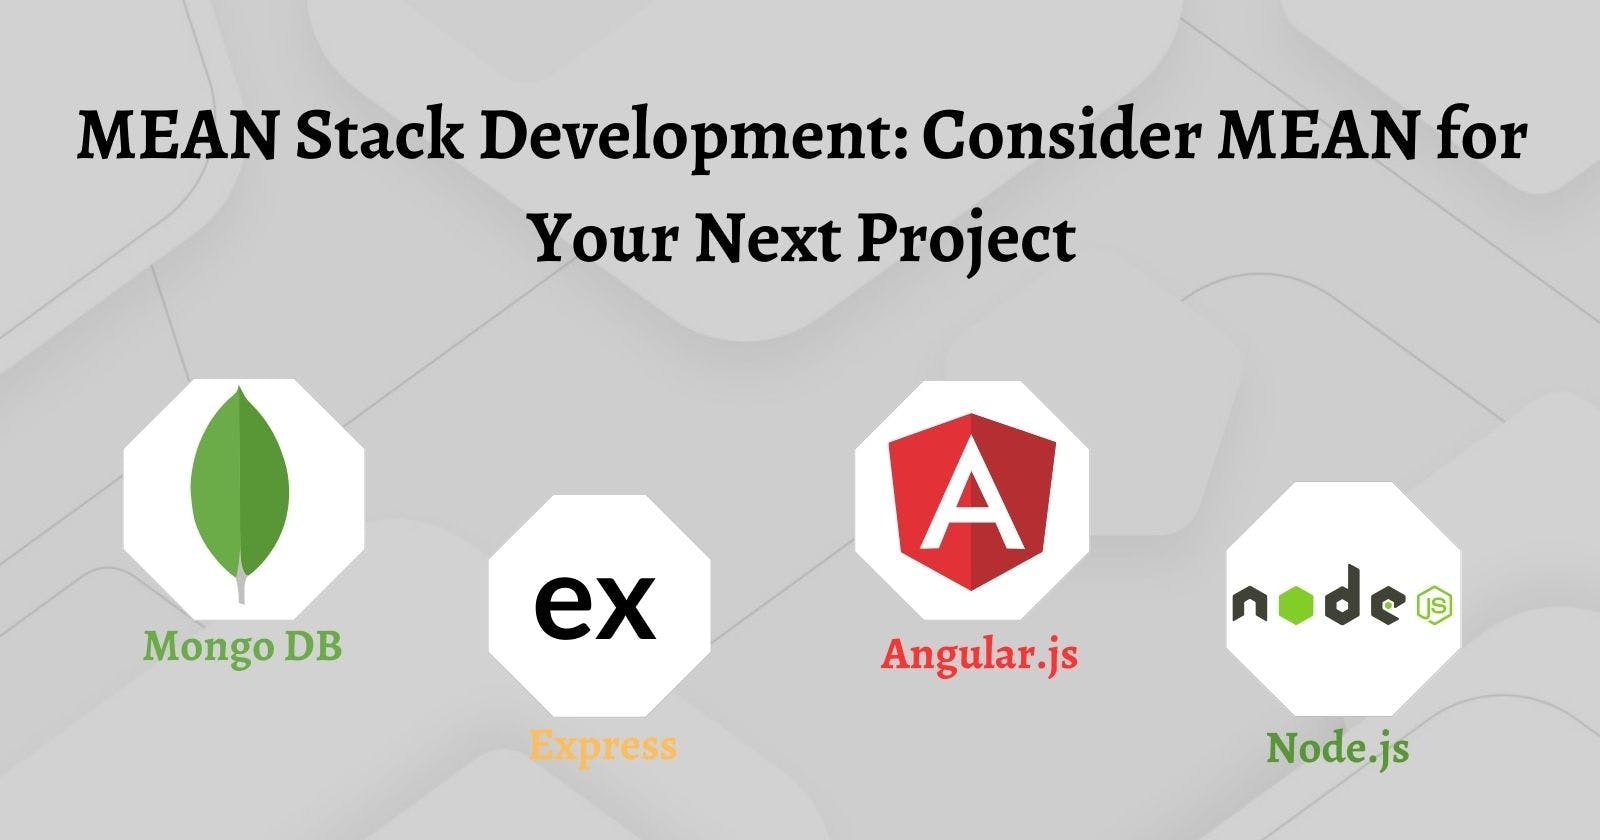 MEAN Stack Development: Consider MEAN for Your Next Project